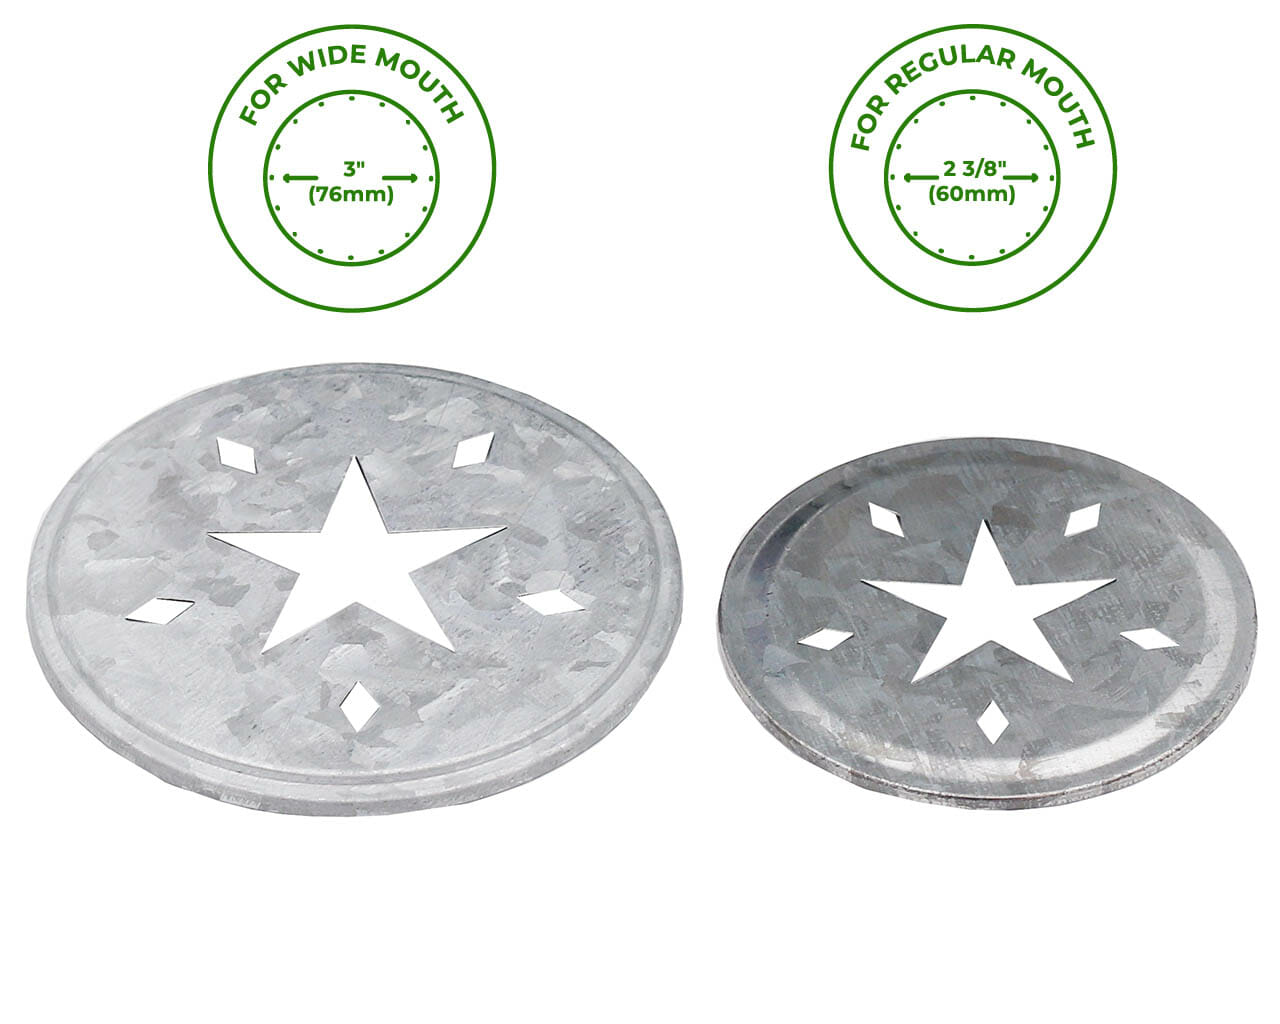 Galvanized Metal Star Cut-Out Lid Insert for Regular or Wide Mouth Mason Jars